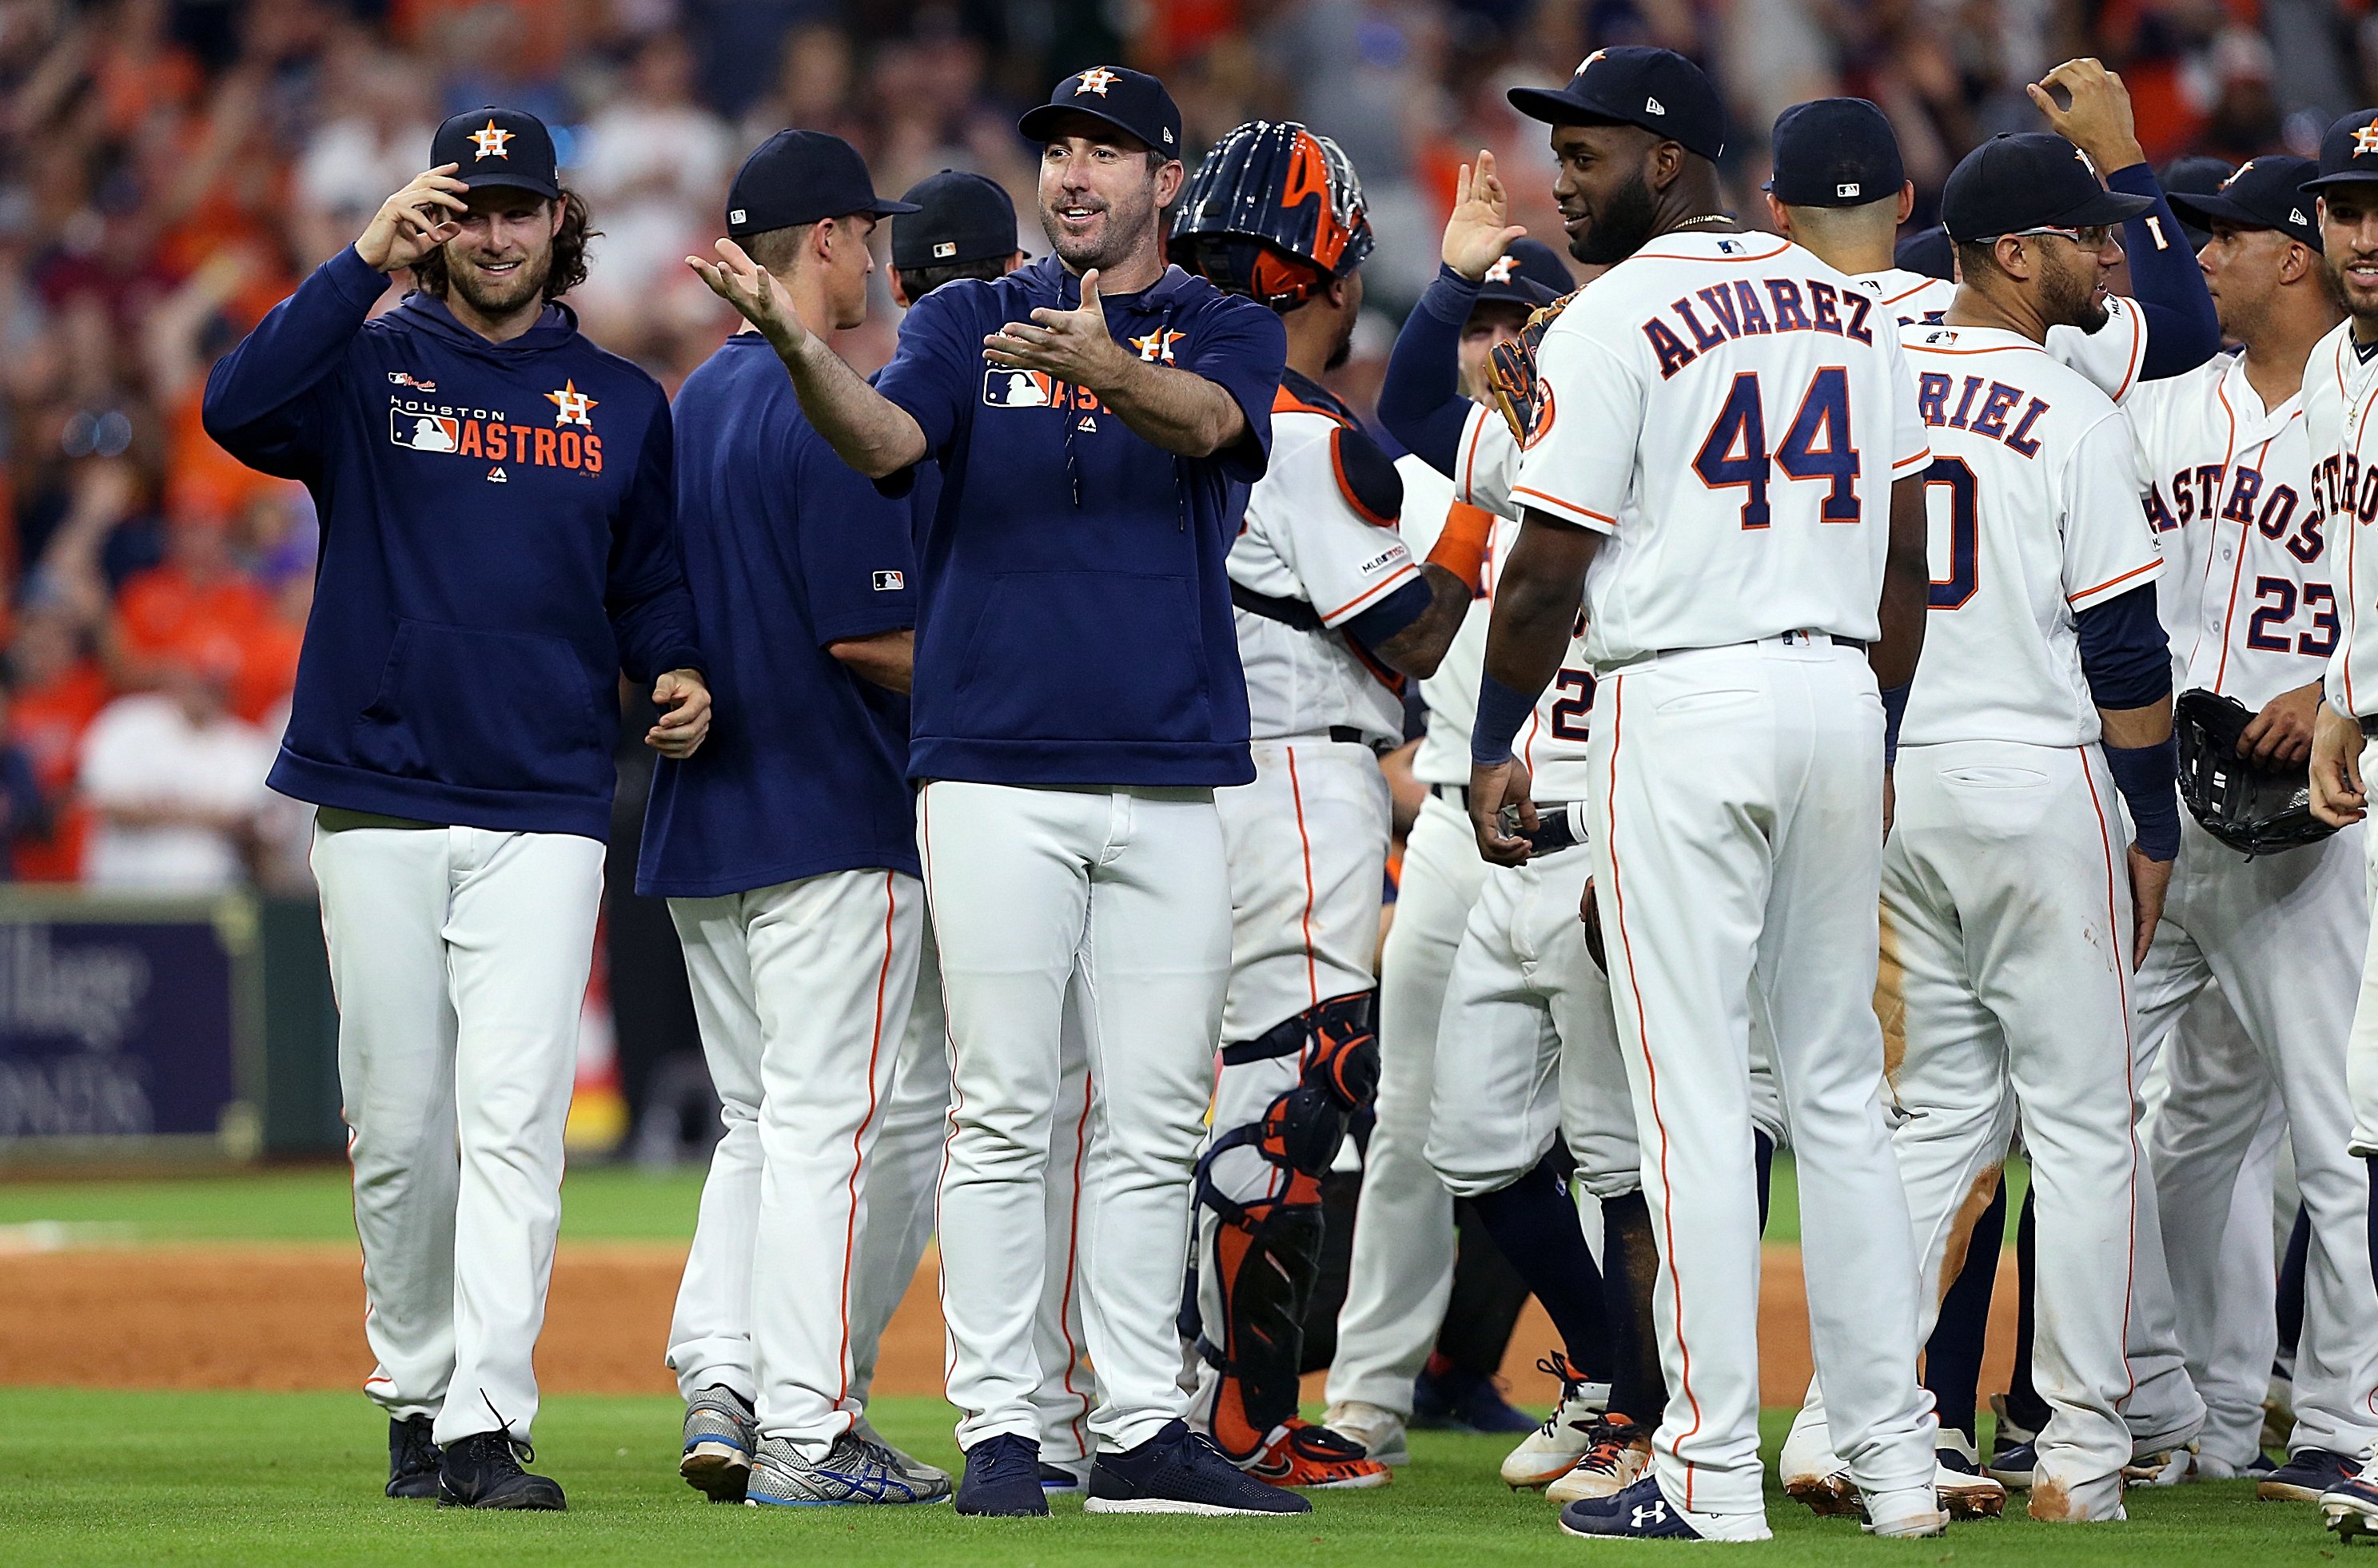 Phillies lose World Series to Astros, team of destiny is denied